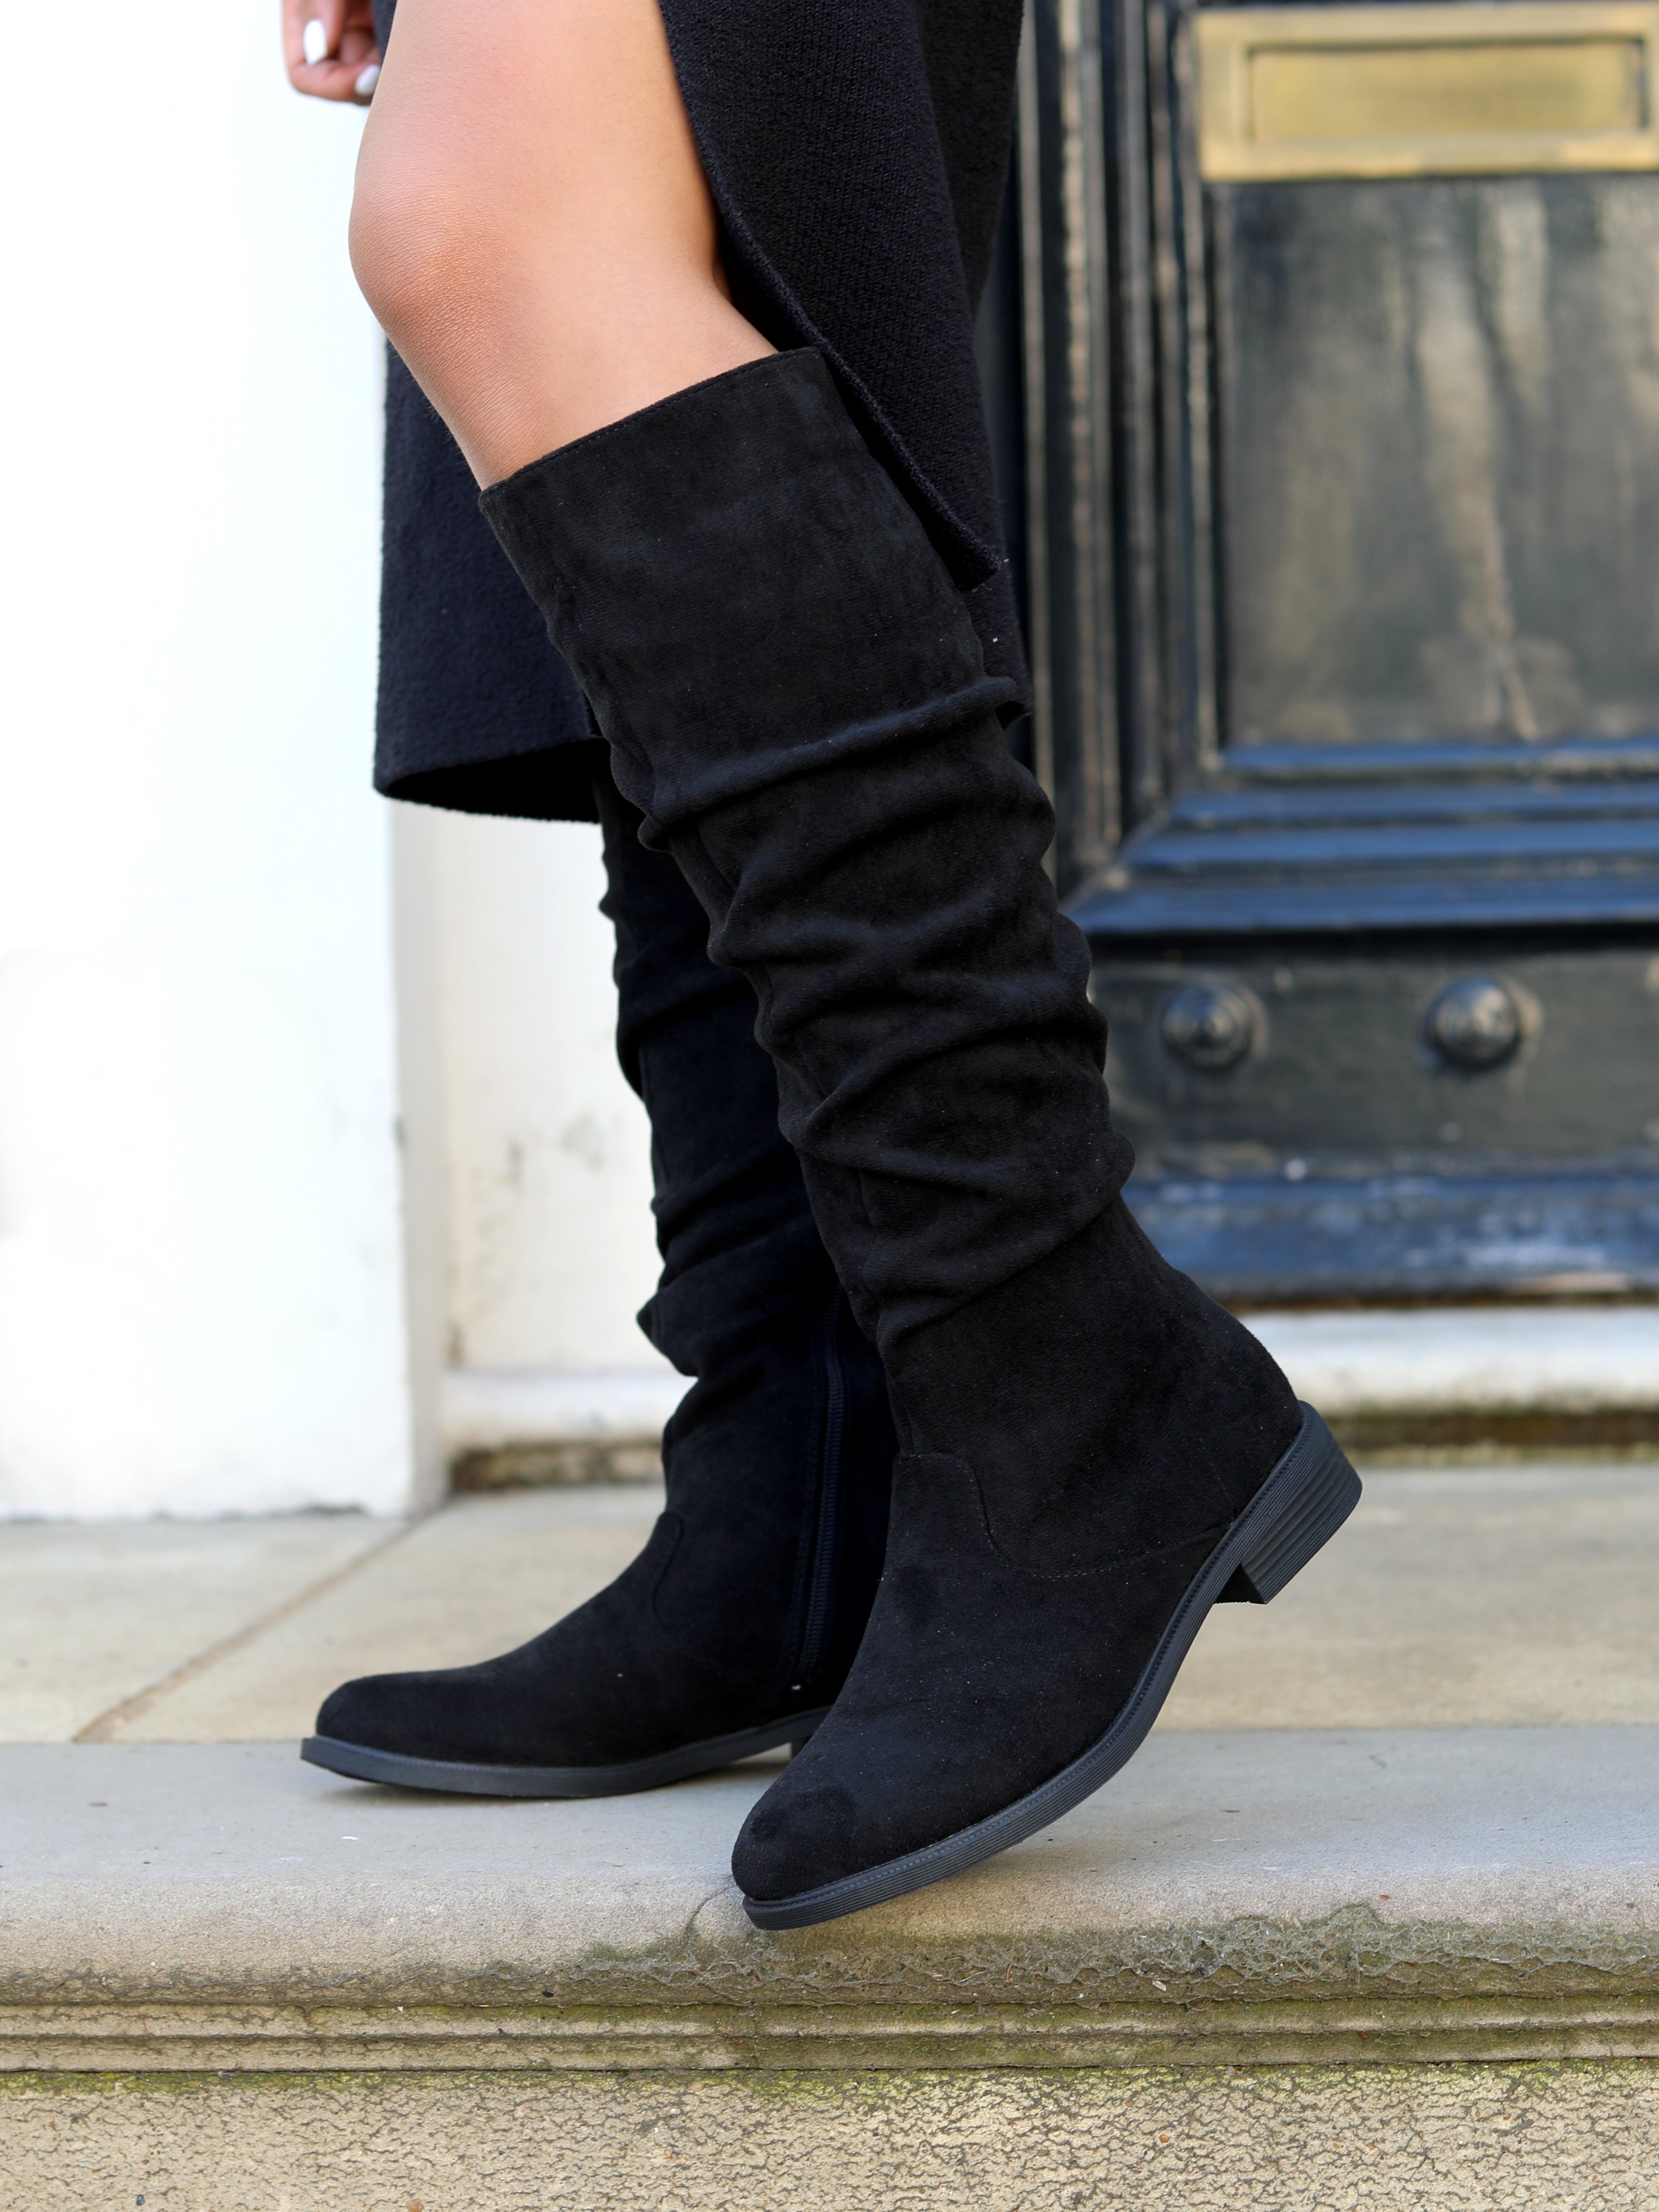 Kami Flat Faux Suede Knee High Boots